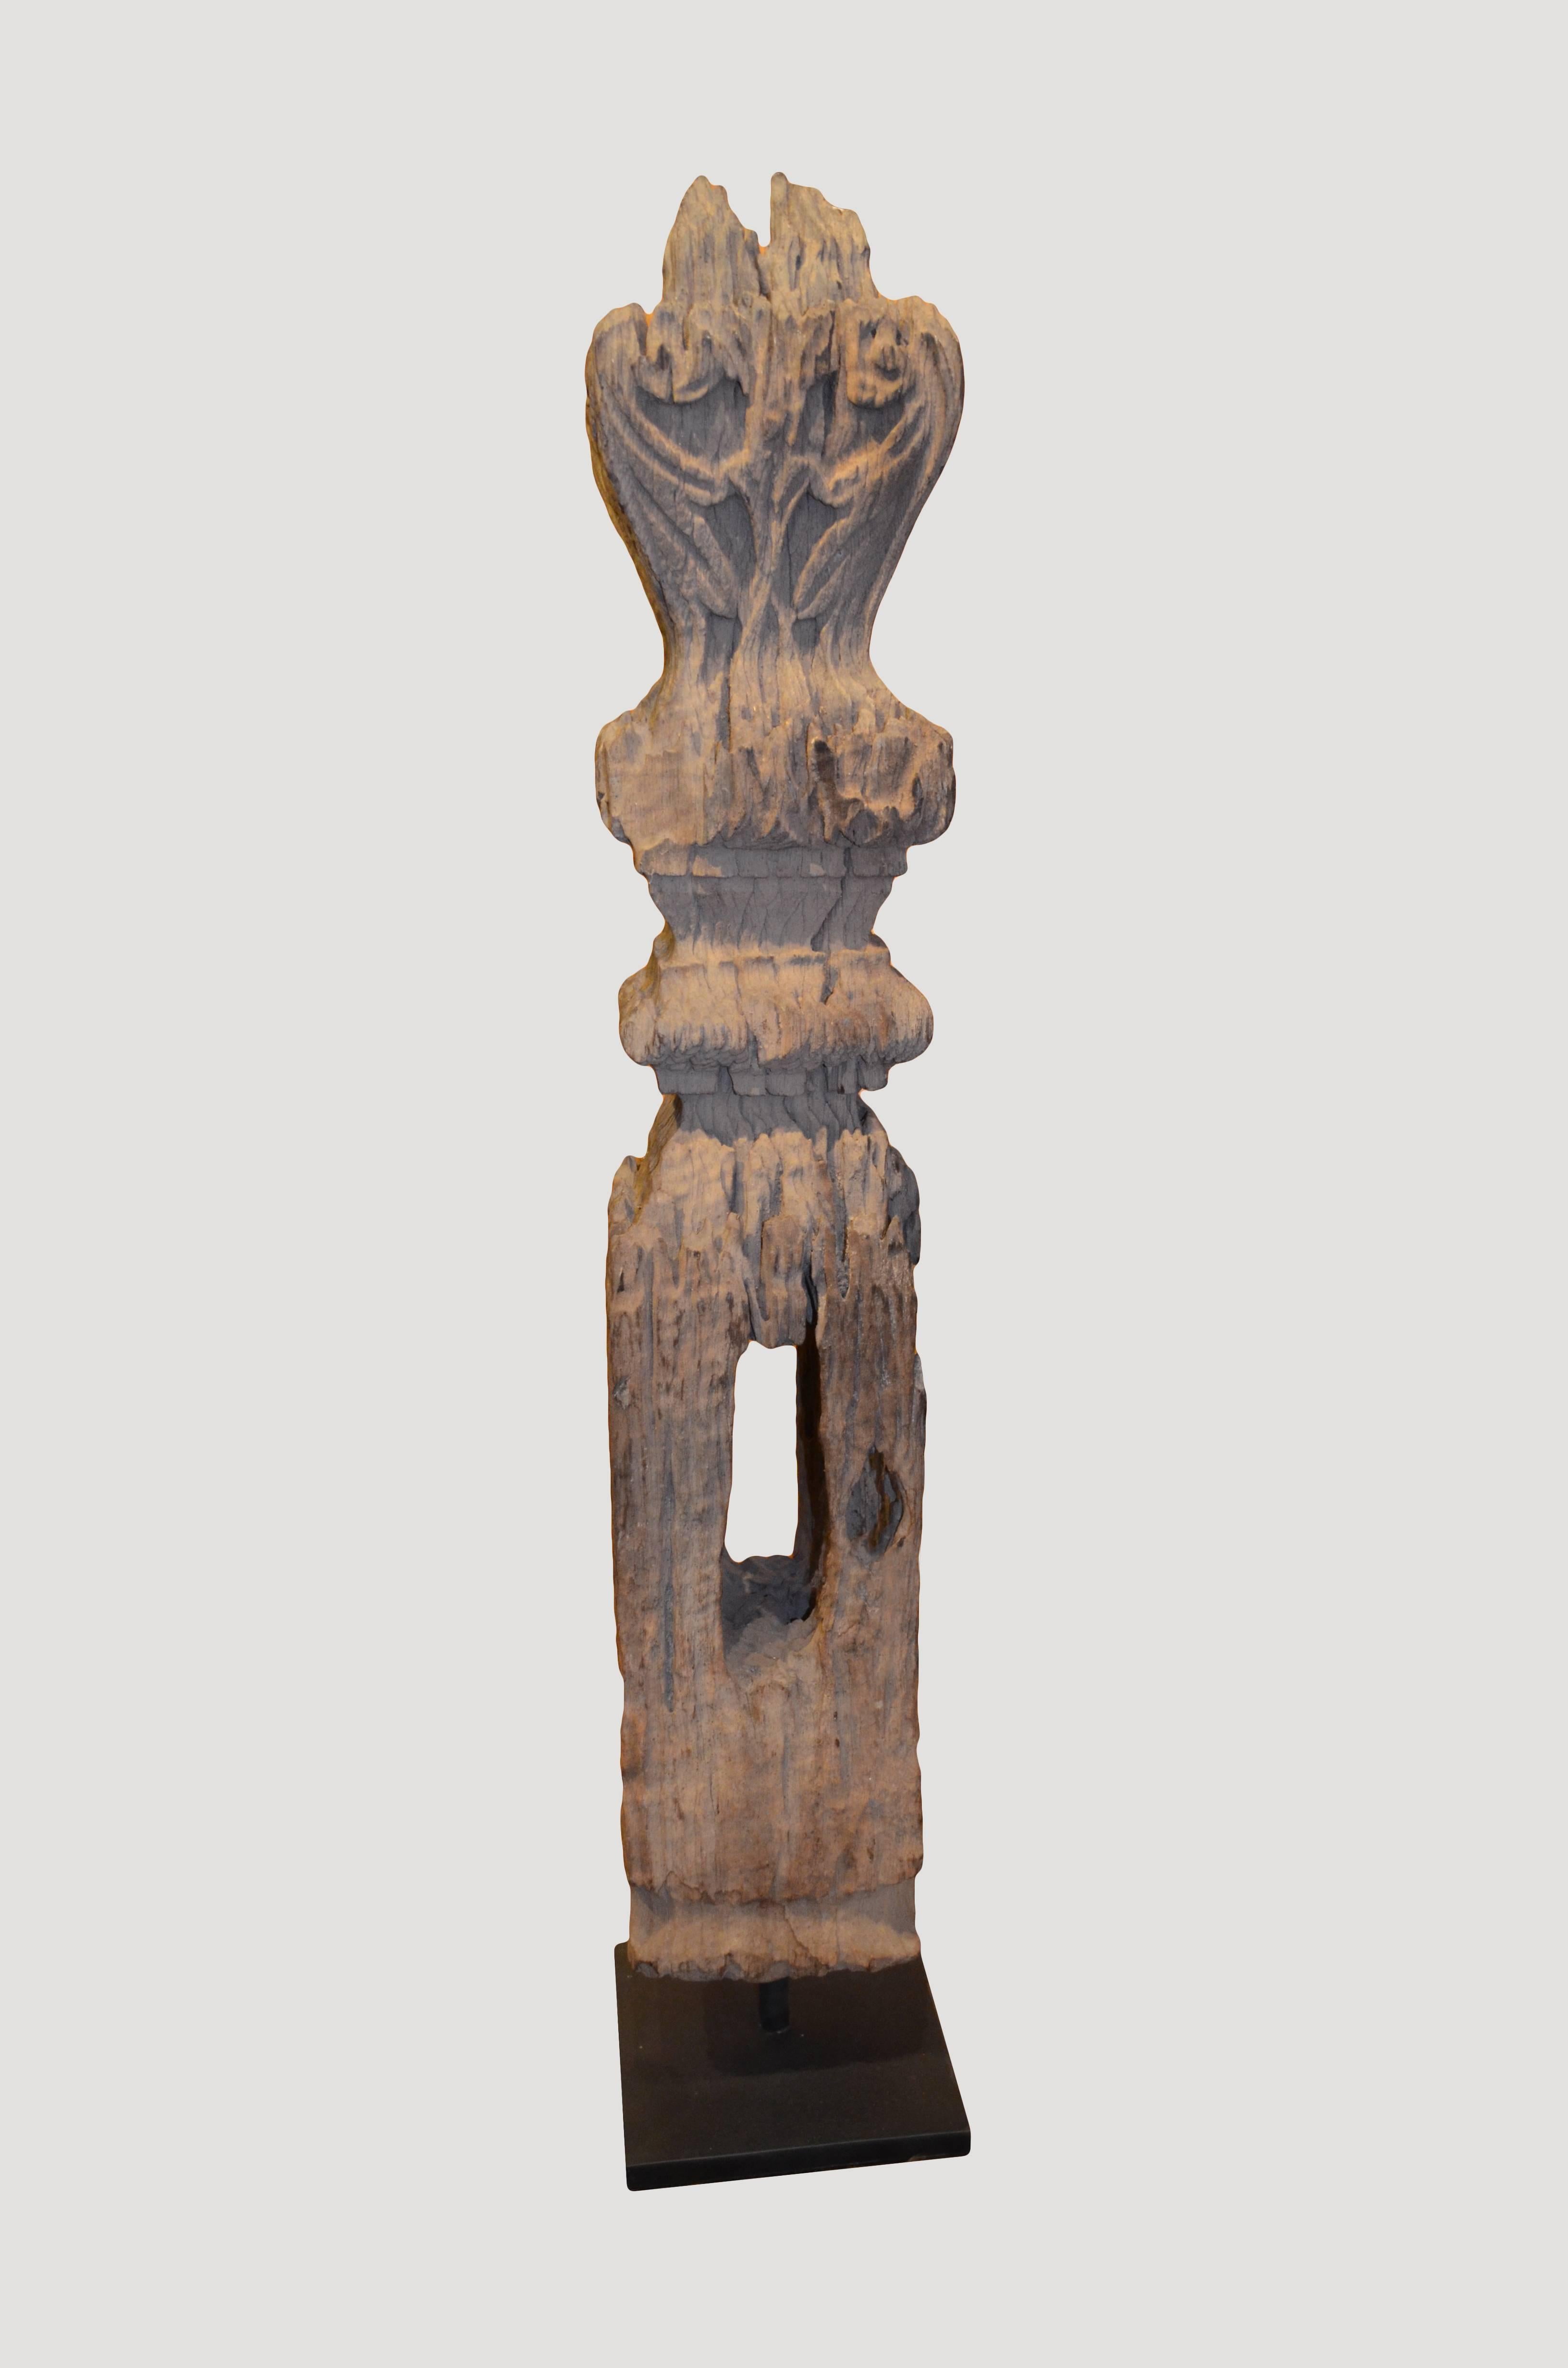 Antique iron wood sculpture from Kalimantan. Used to protect the home.

Andrianna Shamaris, Inc. The Leader In Modern Organic Design™